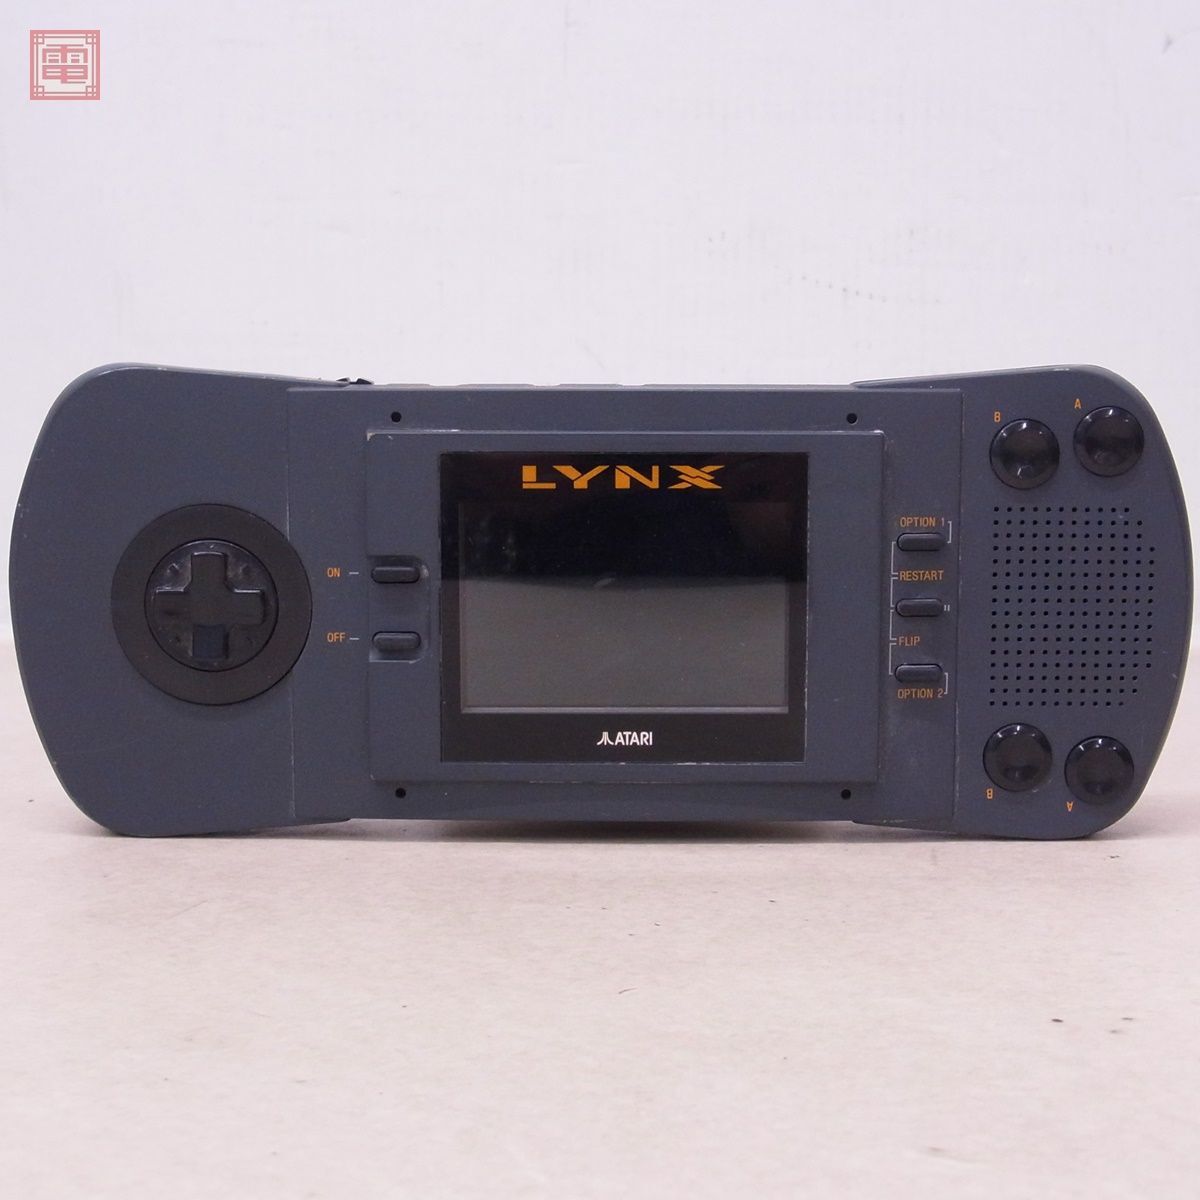 ATARI LYNX body only PAG-0201 electrification un- possible atali links Junk parts taking . etc. please [10